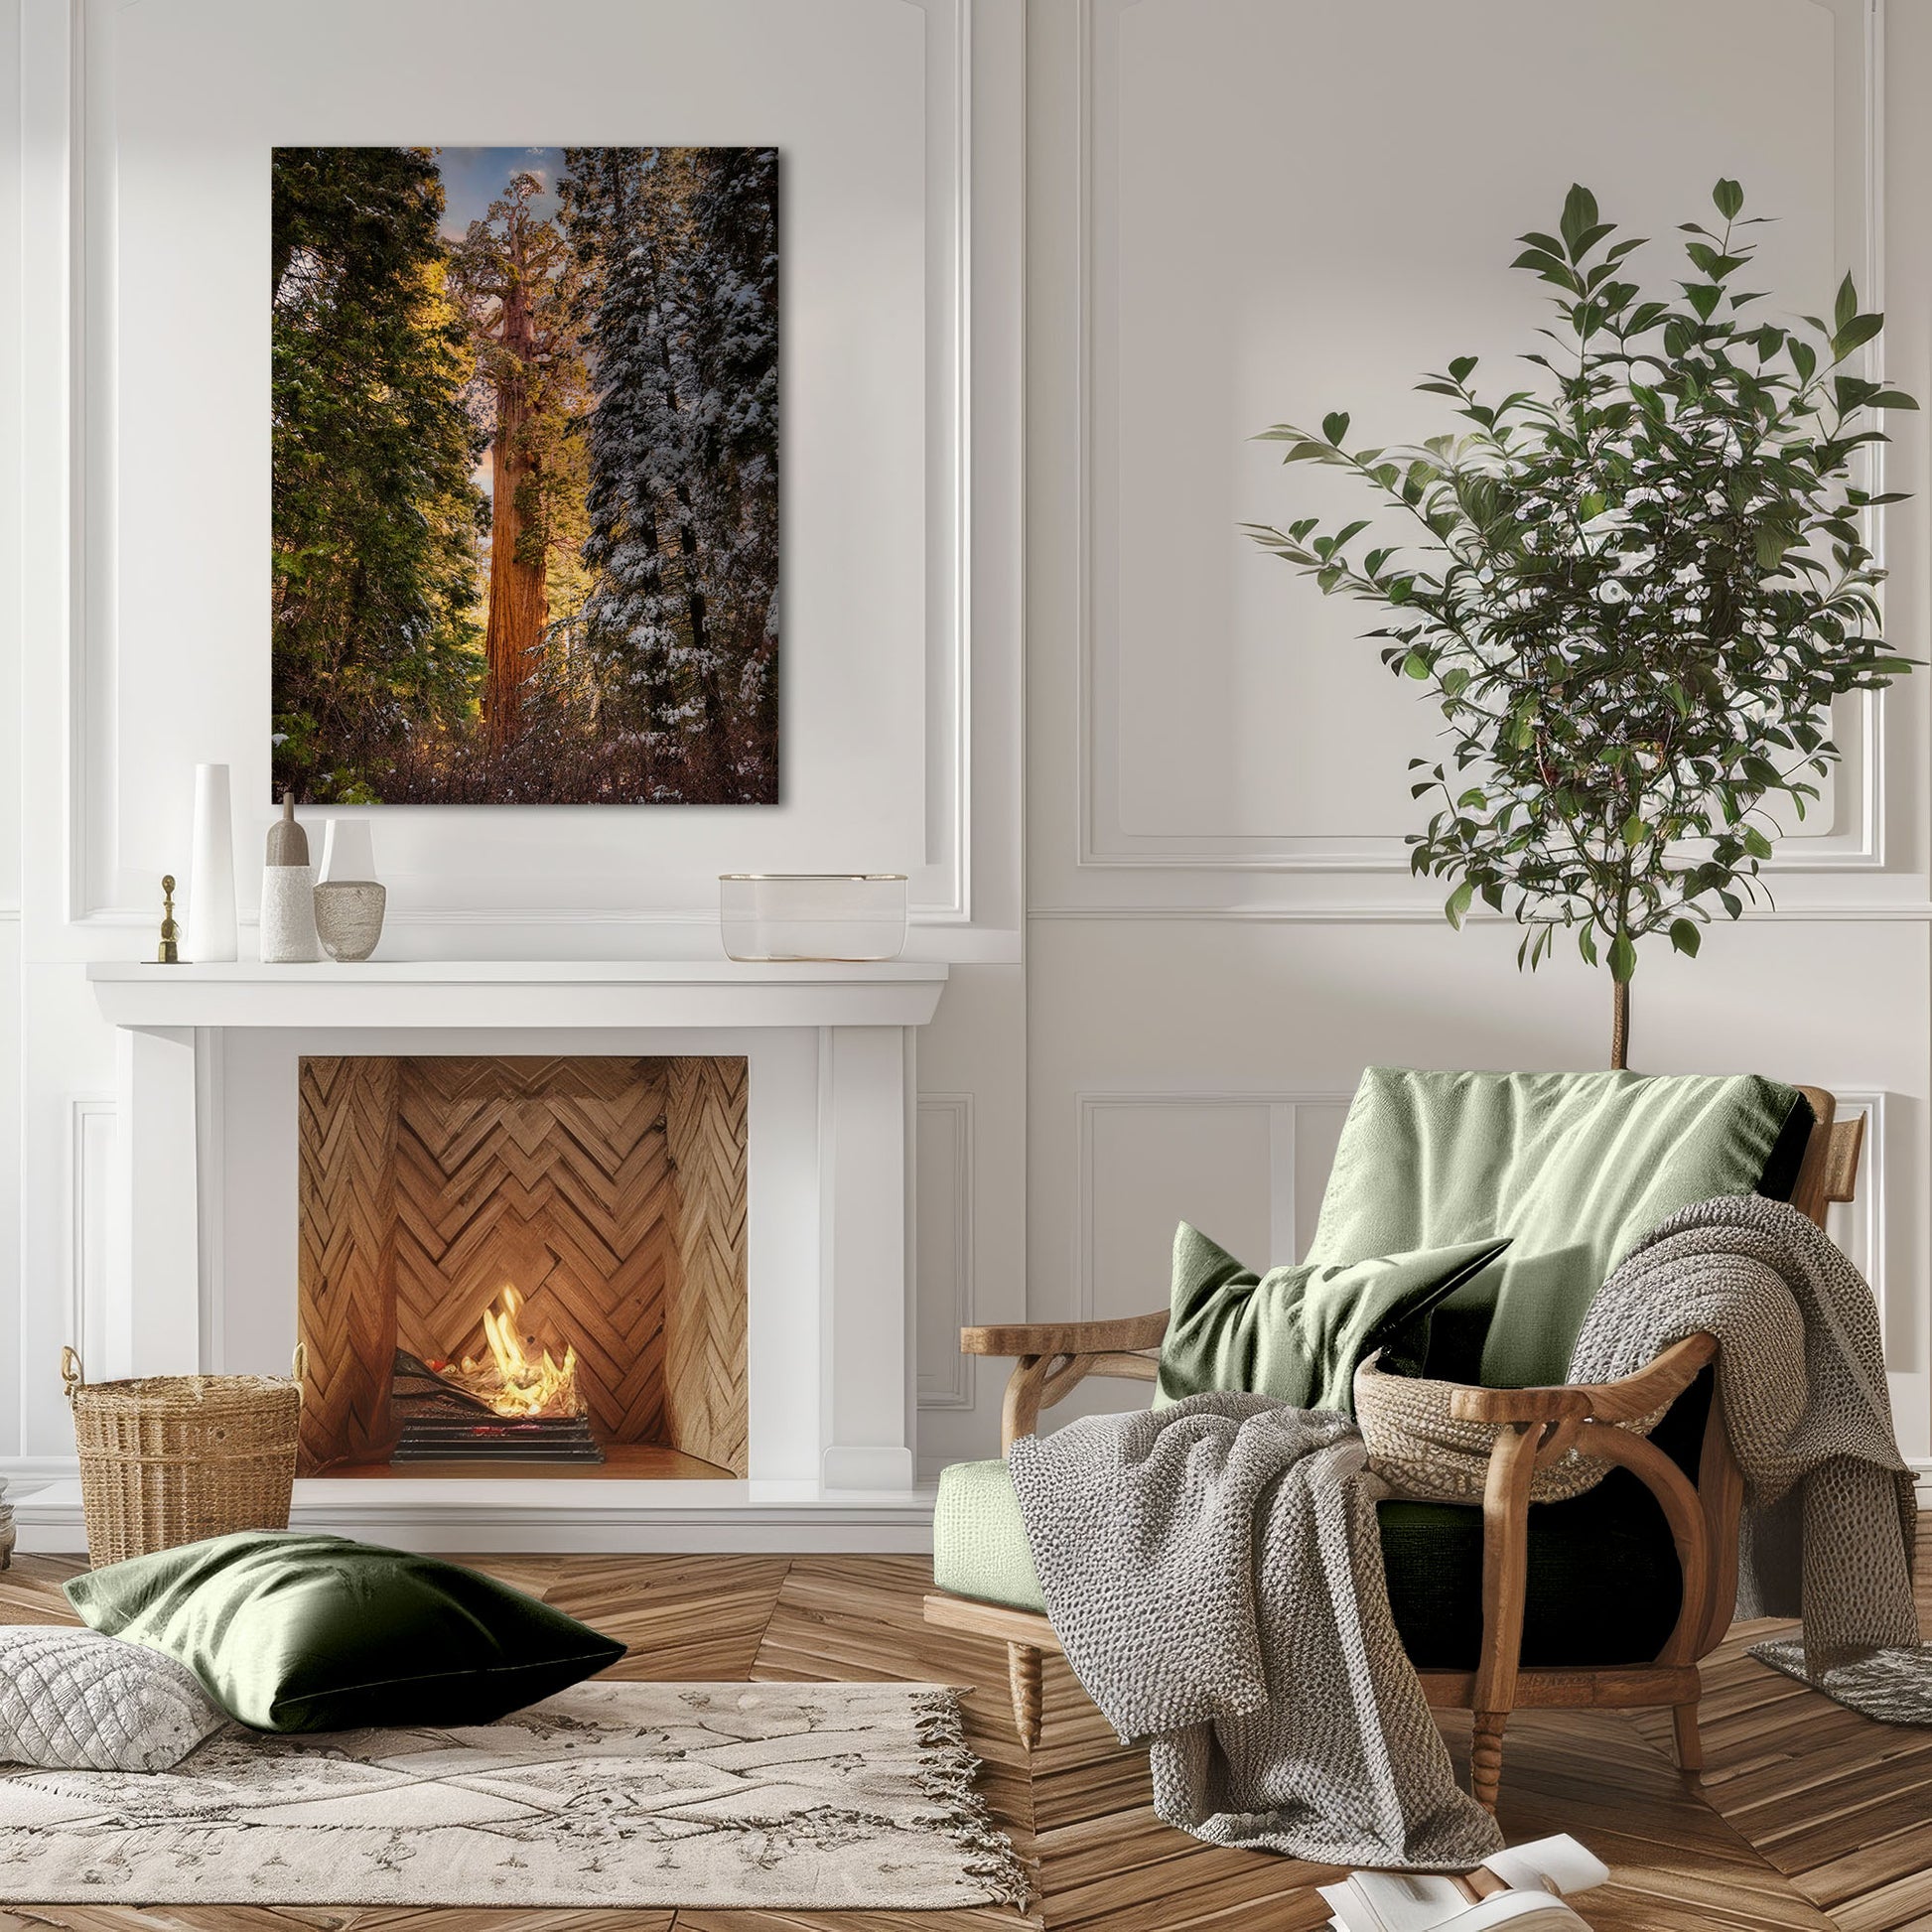 A cozy living room is graced by a canvas wall art depicting the magnificent Giant Sequoia of Grant Grove, complementing the warm ambience and green accents.